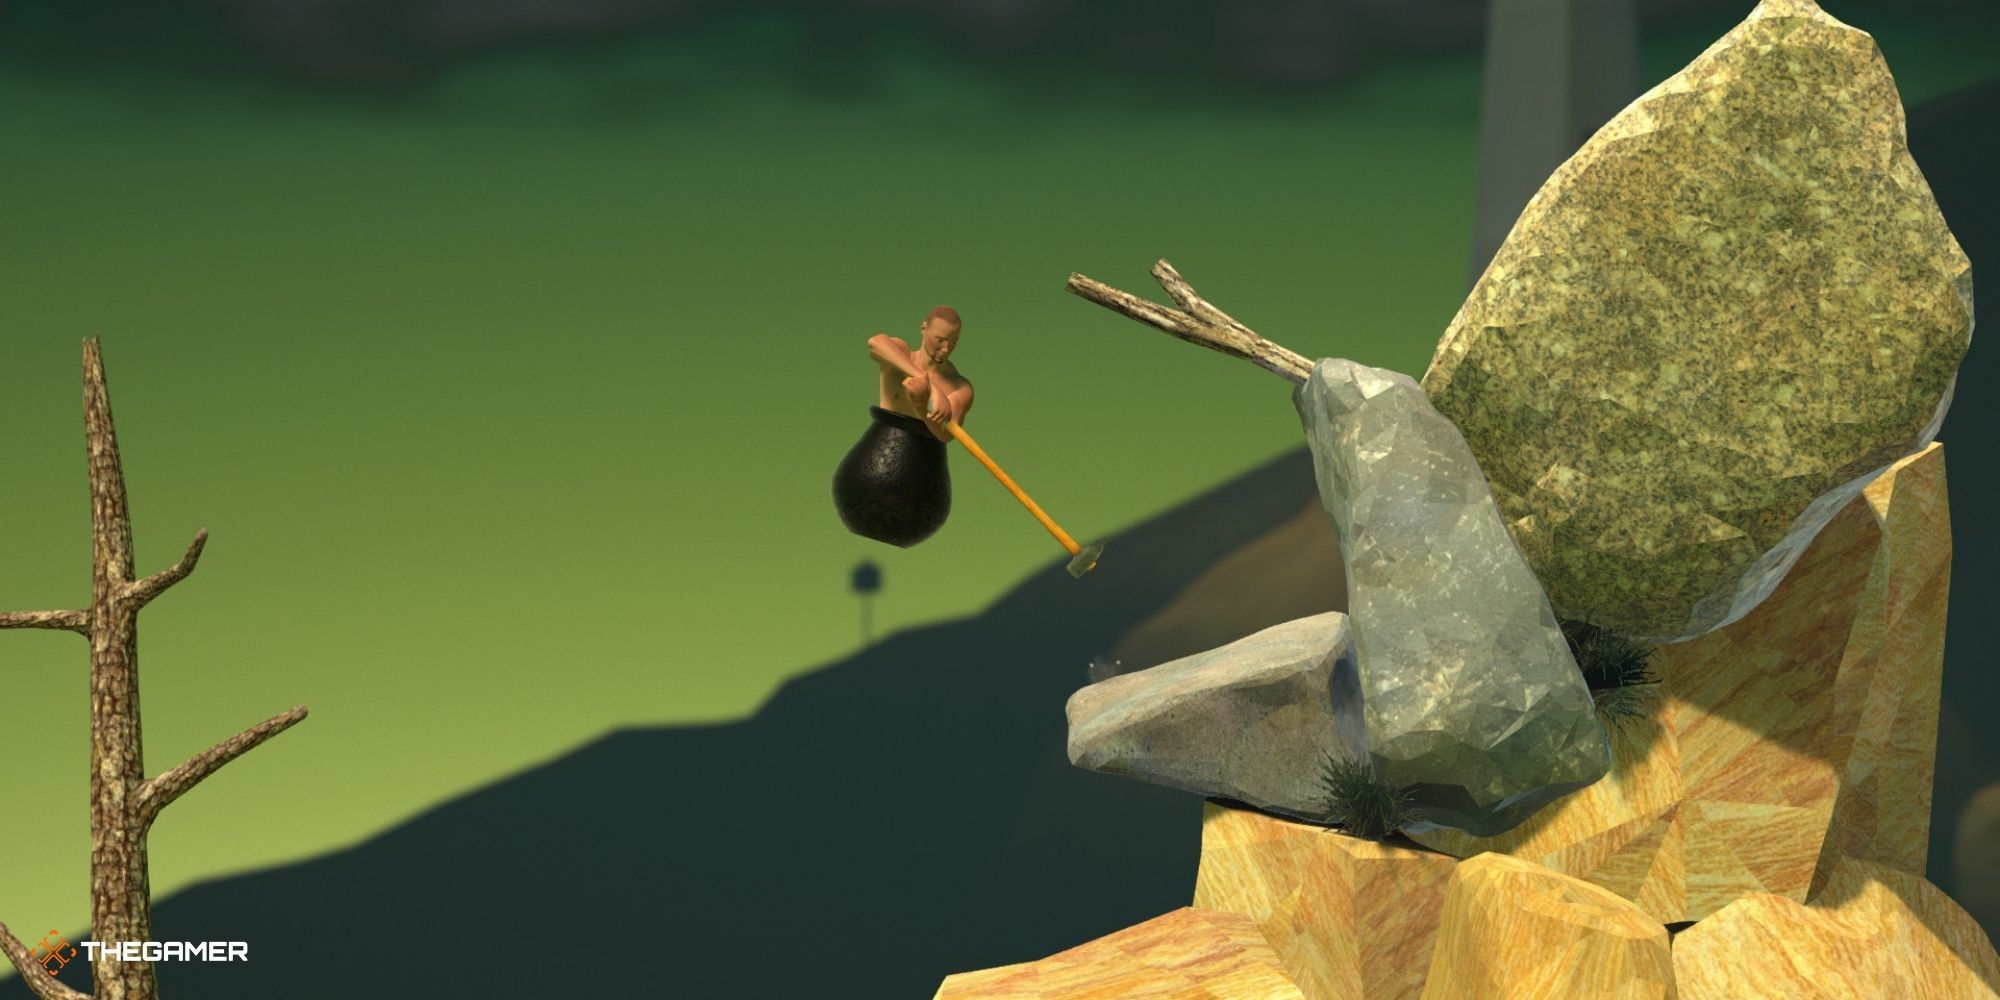 Getting Over It With Bennet Foddy - gameplay screenshot